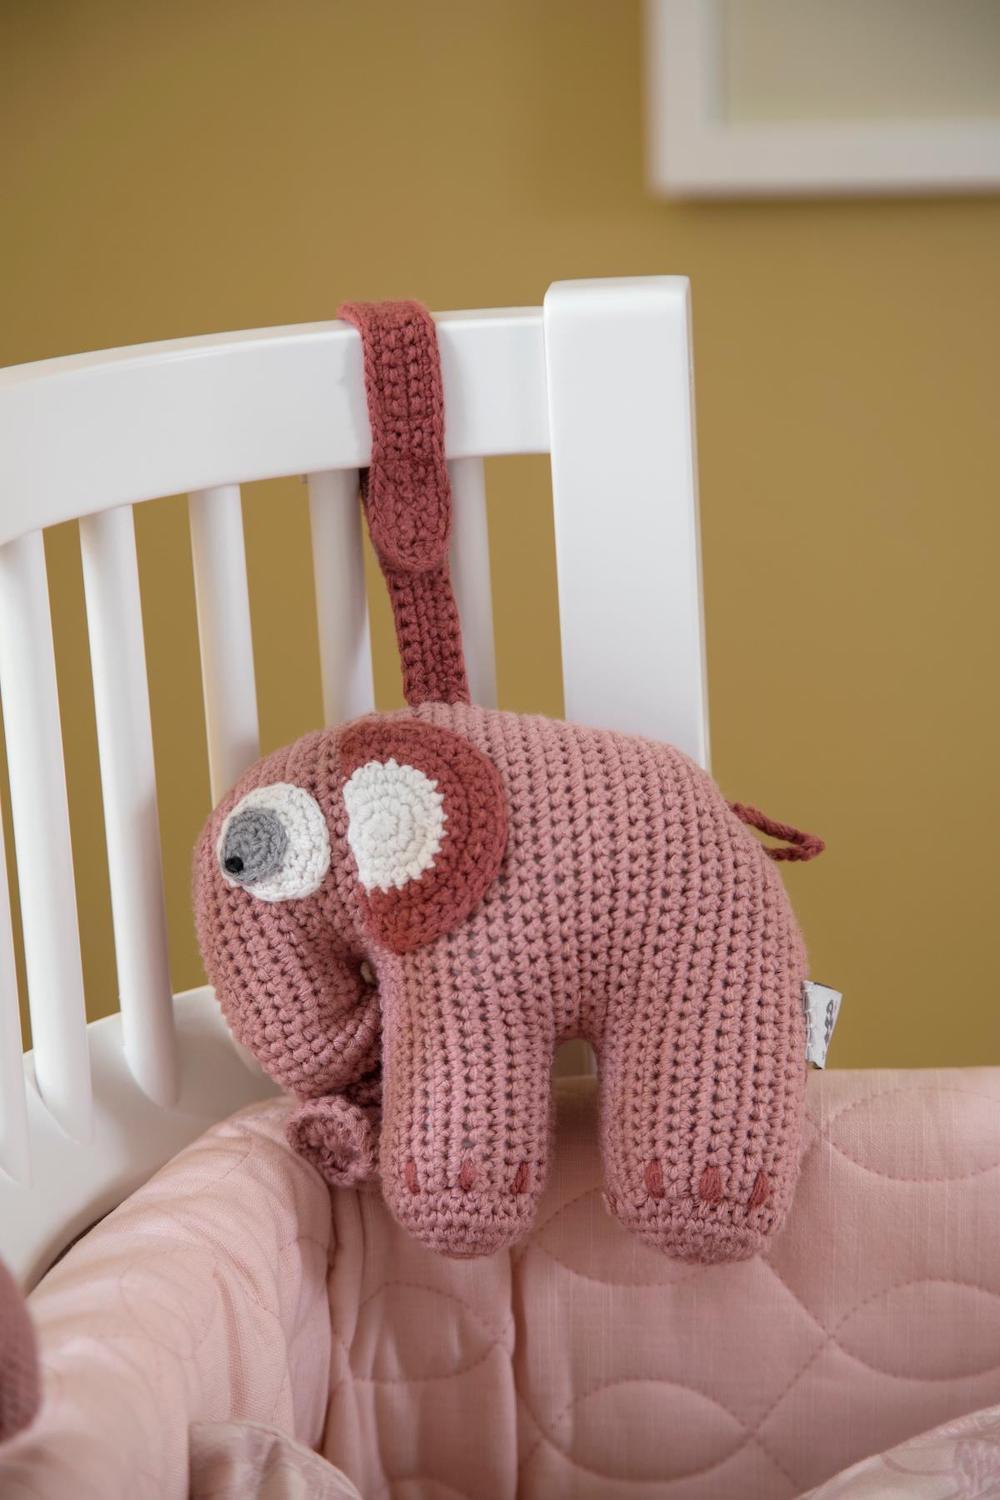 Sebra Fanto the Elephant Musical Pull Toy in Blossom Pink - Scandibørn